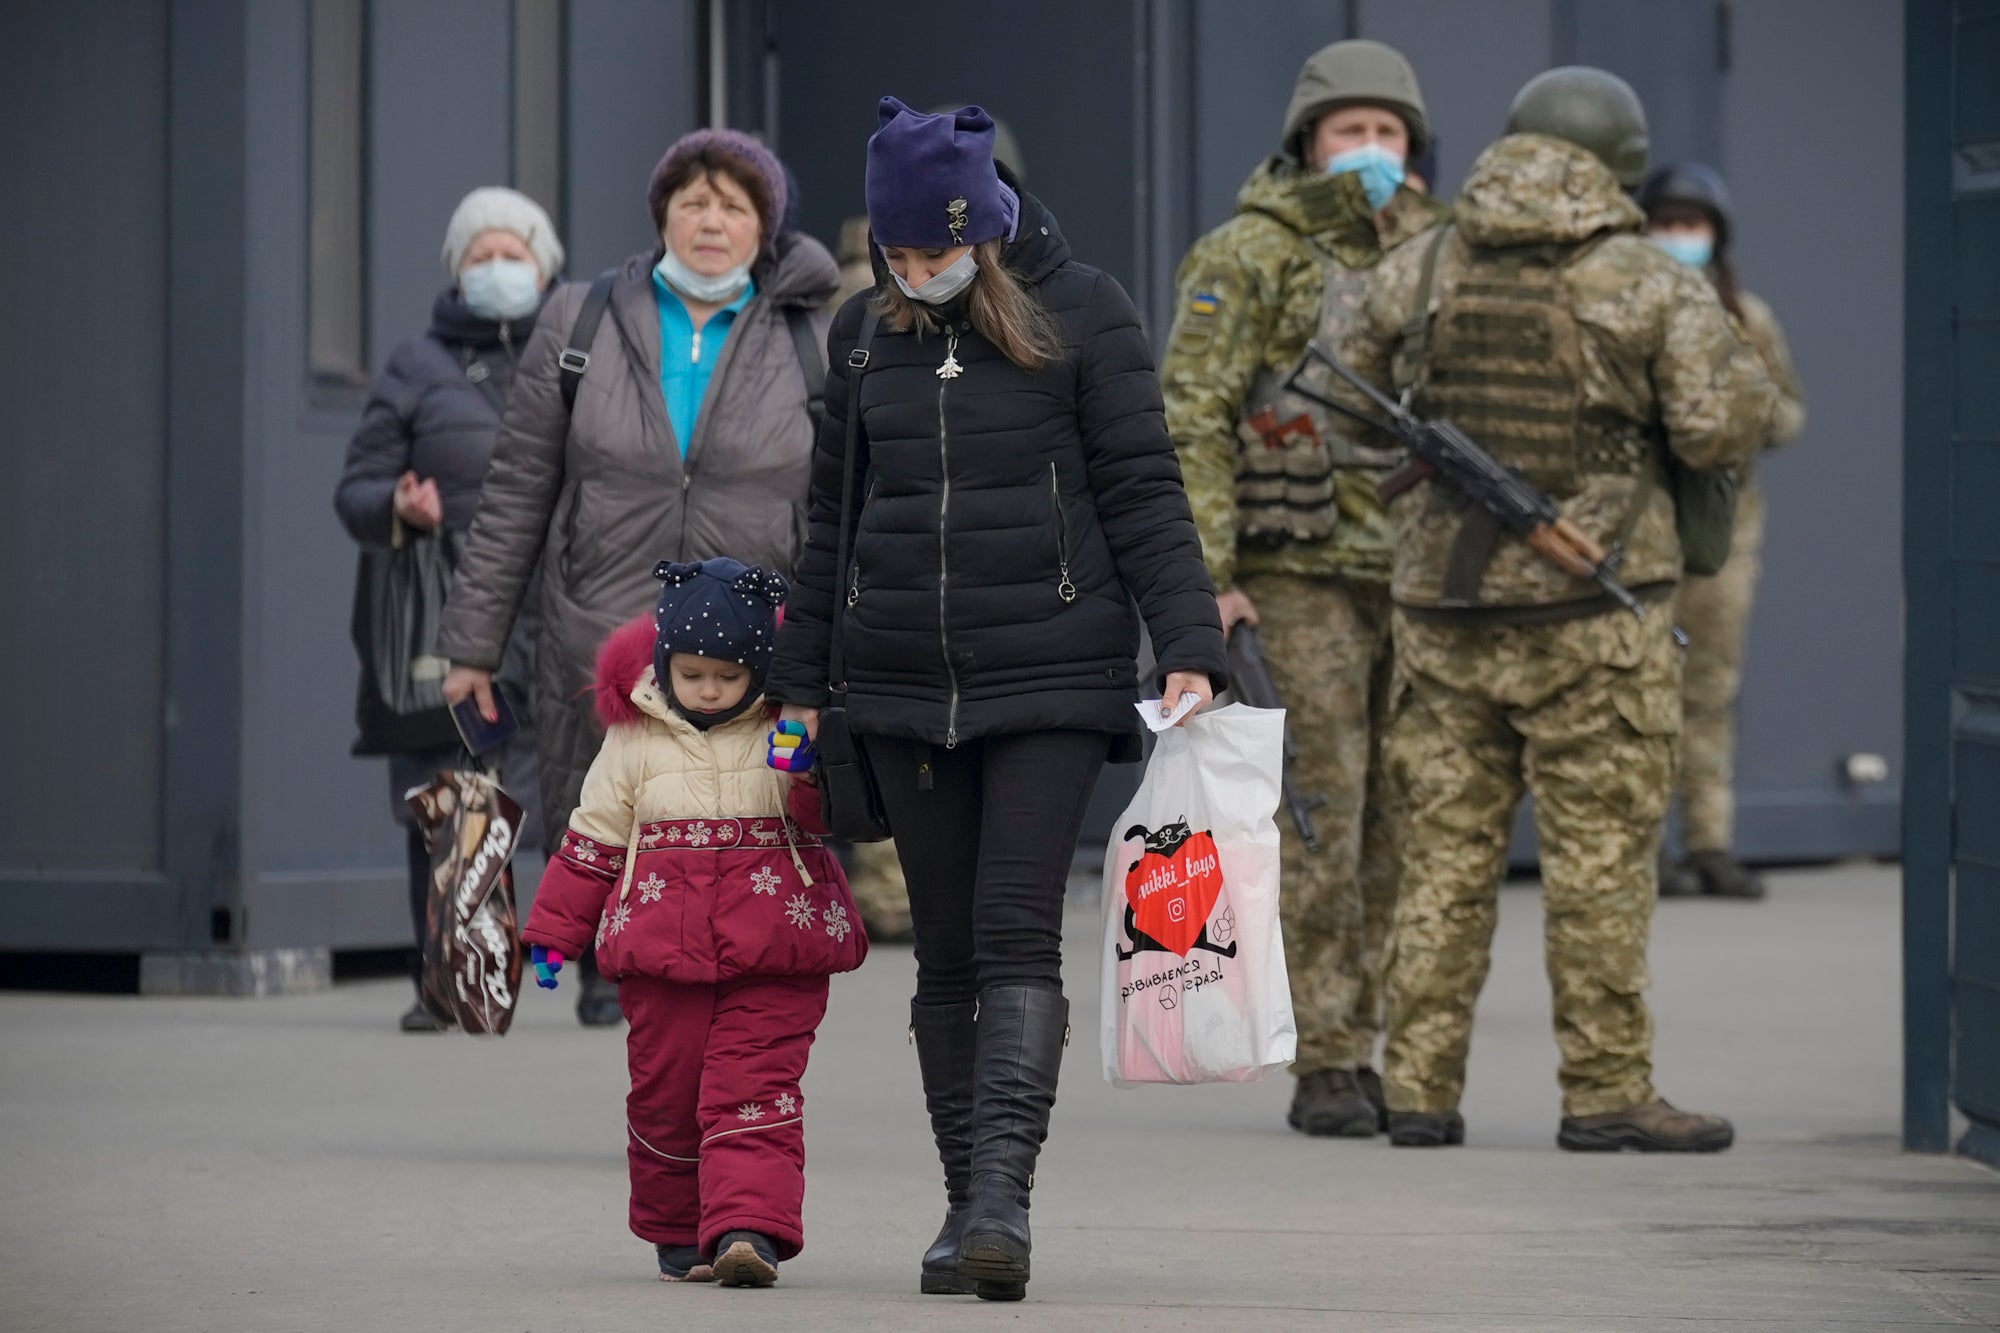 A woman holds a child’s hand as they cross from Ukrainian government to pro-Russian separatist controlled territory in the Luhansk region of eastern Ukraine (Vadim Ghirda/AP)